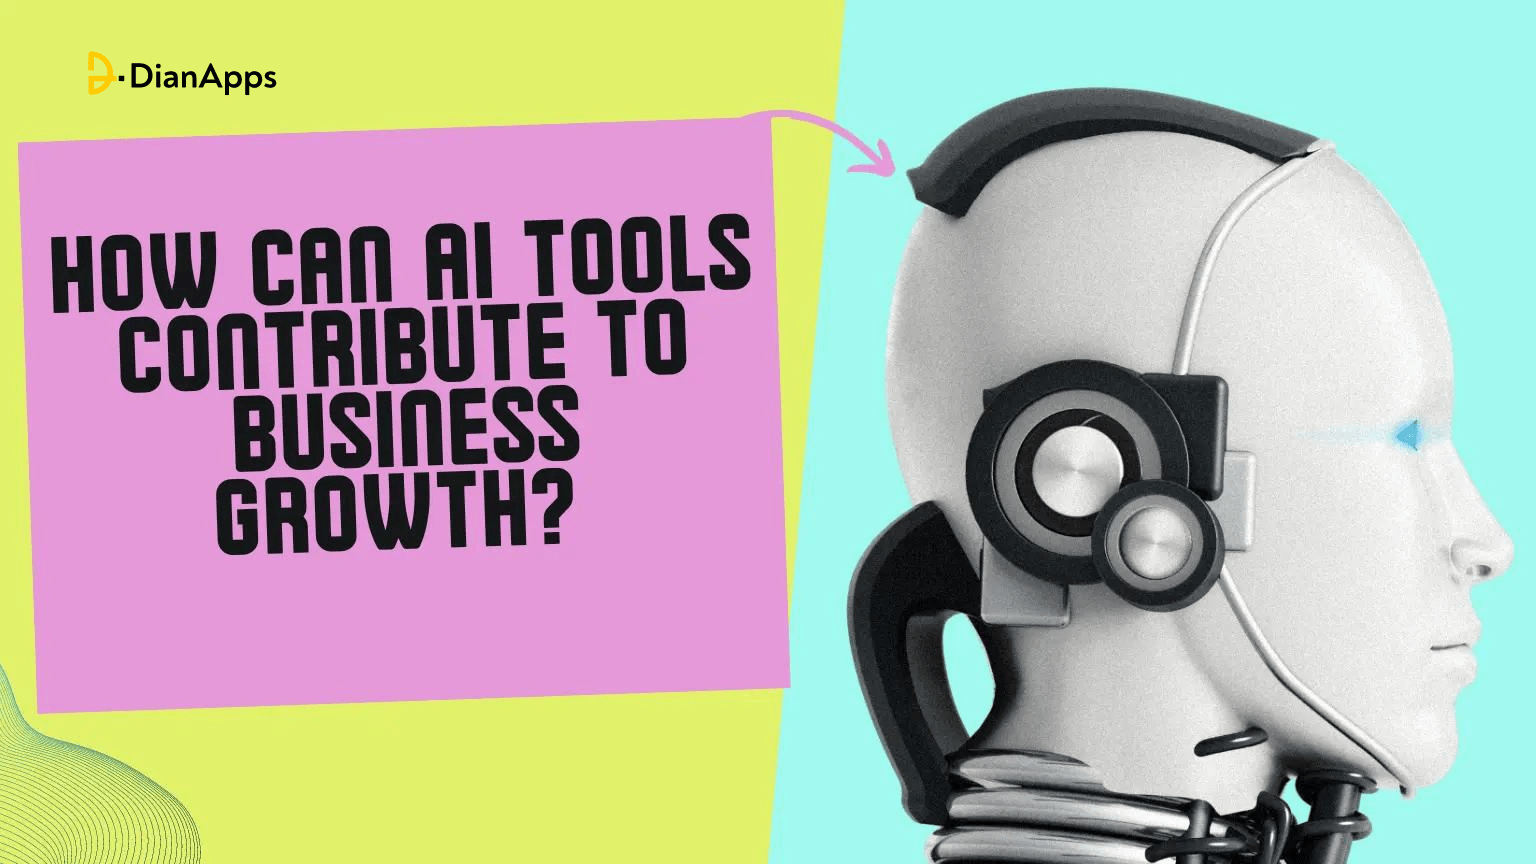 AI Tools Contribute to Business Growth